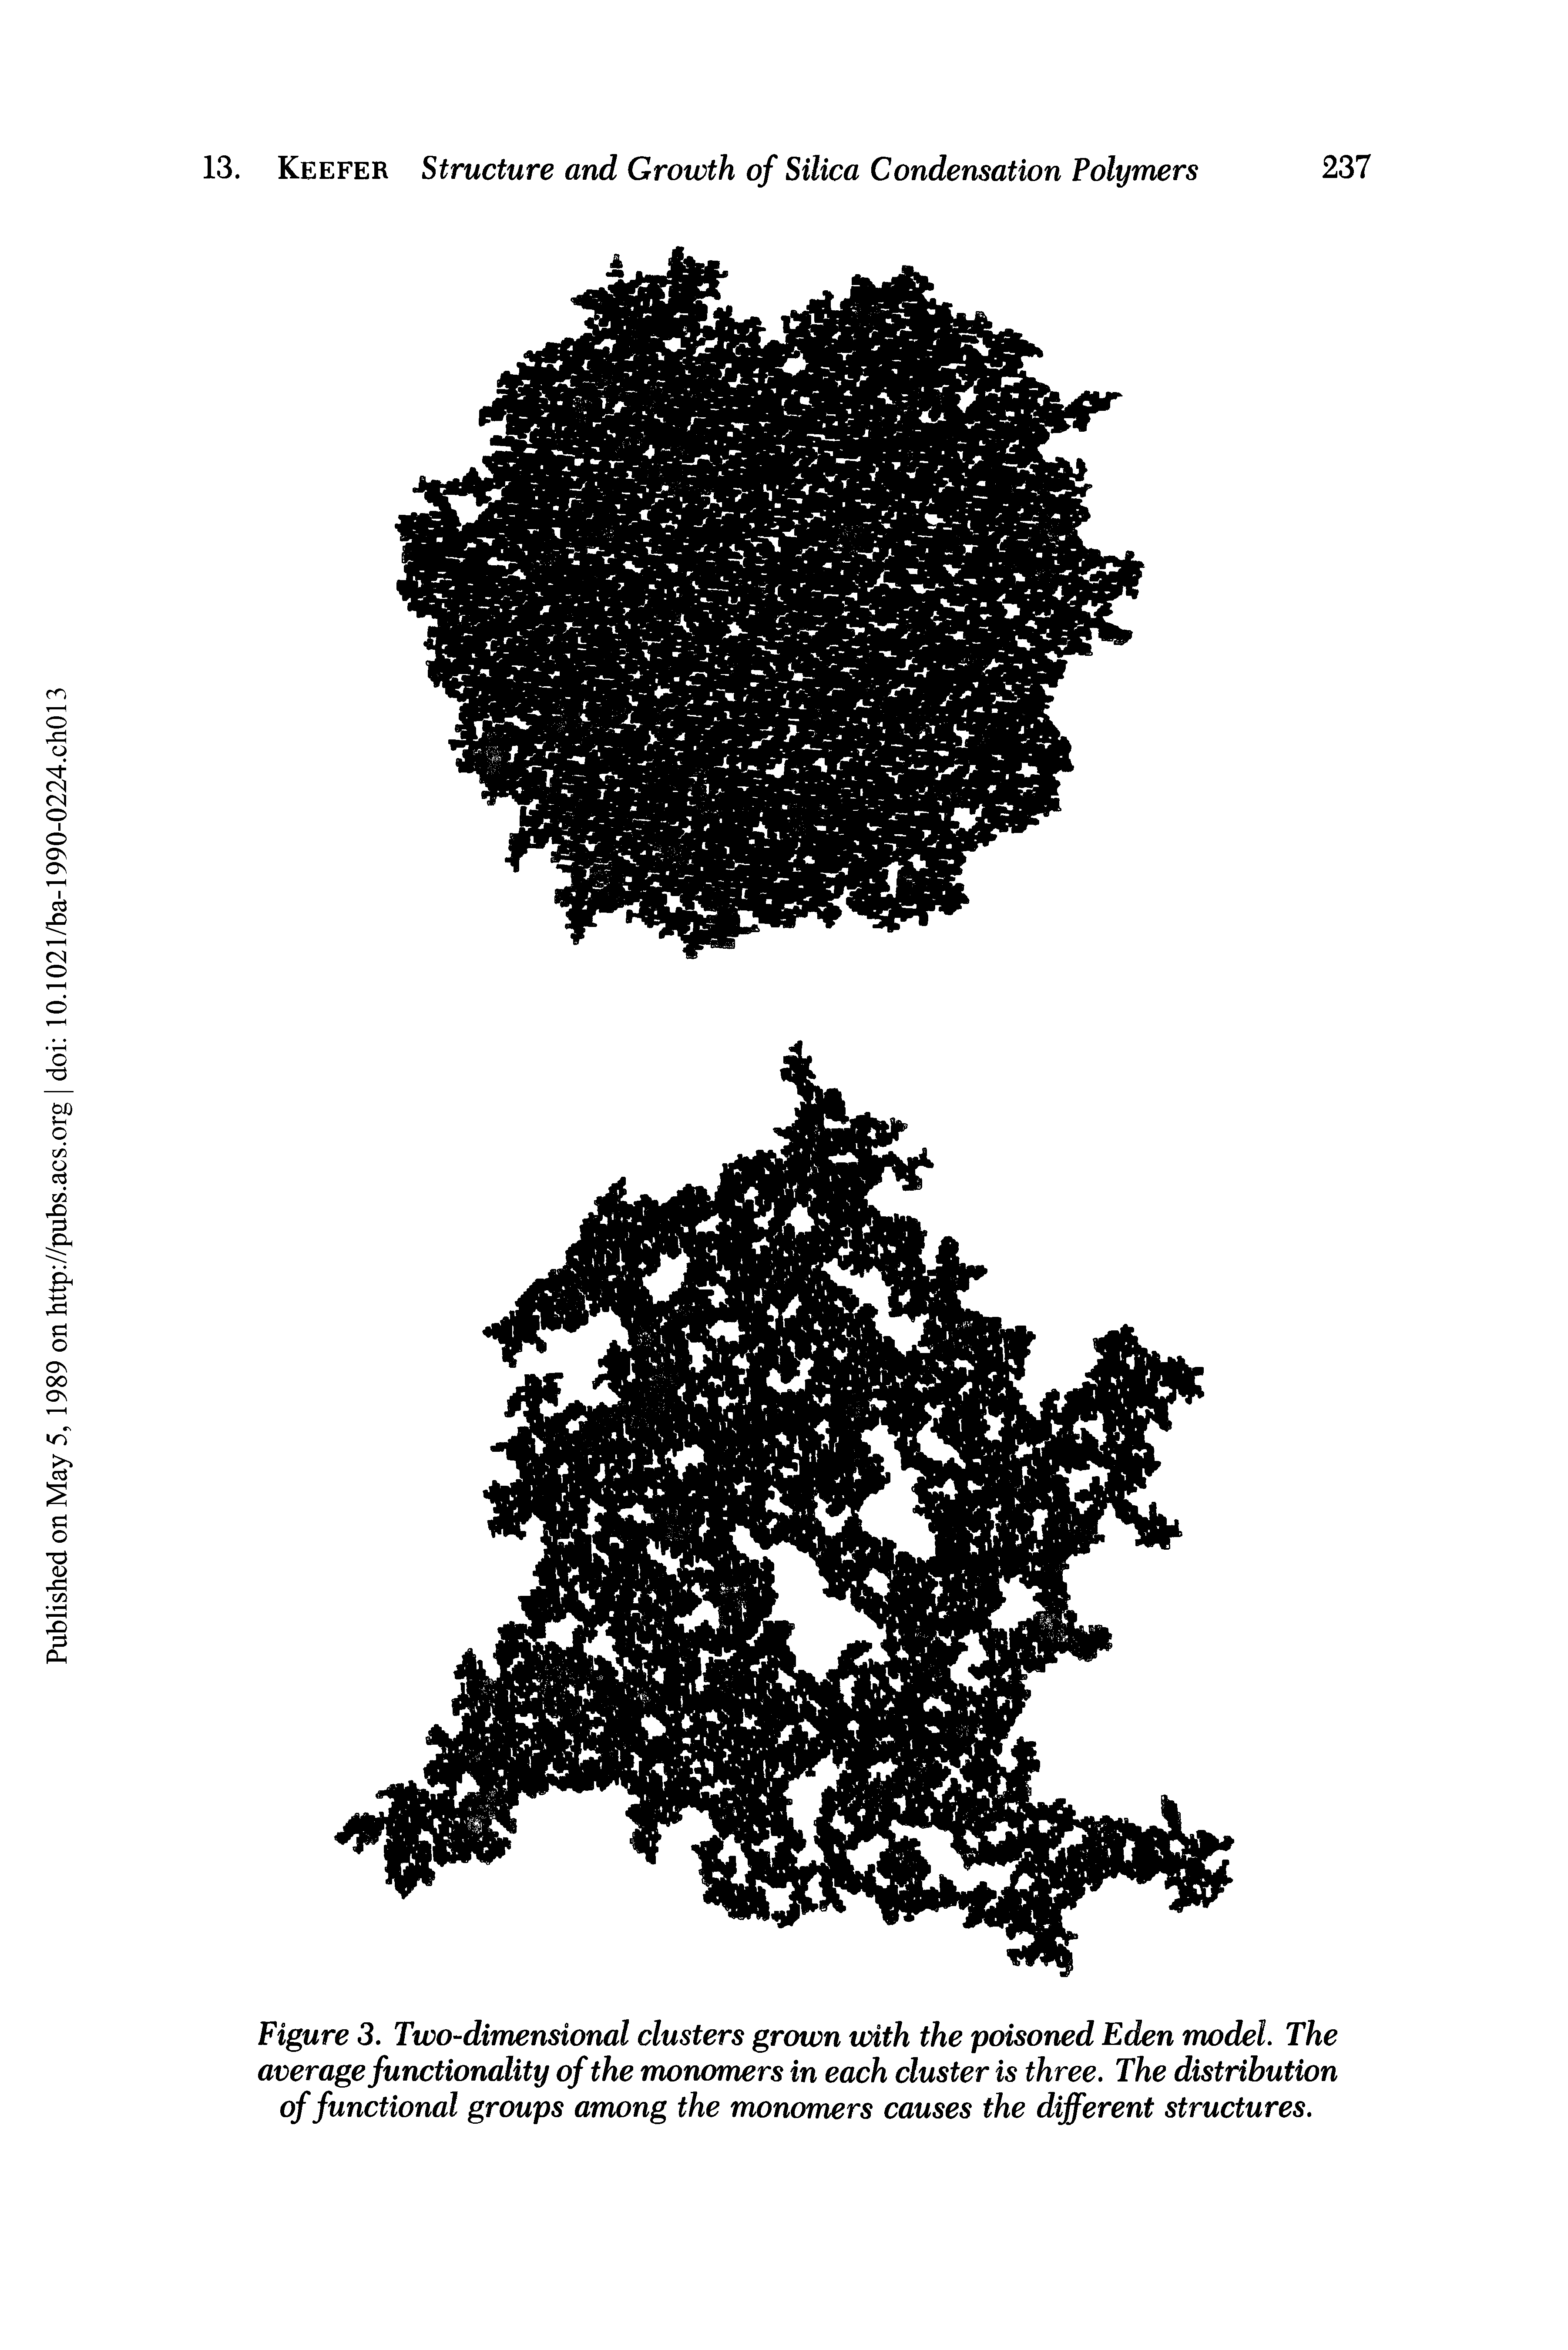 Figure 3. Two-dimensional clusters grown with the poisoned Eden model. The average functionality of the monomers in each cluster is three. The distribution of functional groups among the monomers causes the different structures.